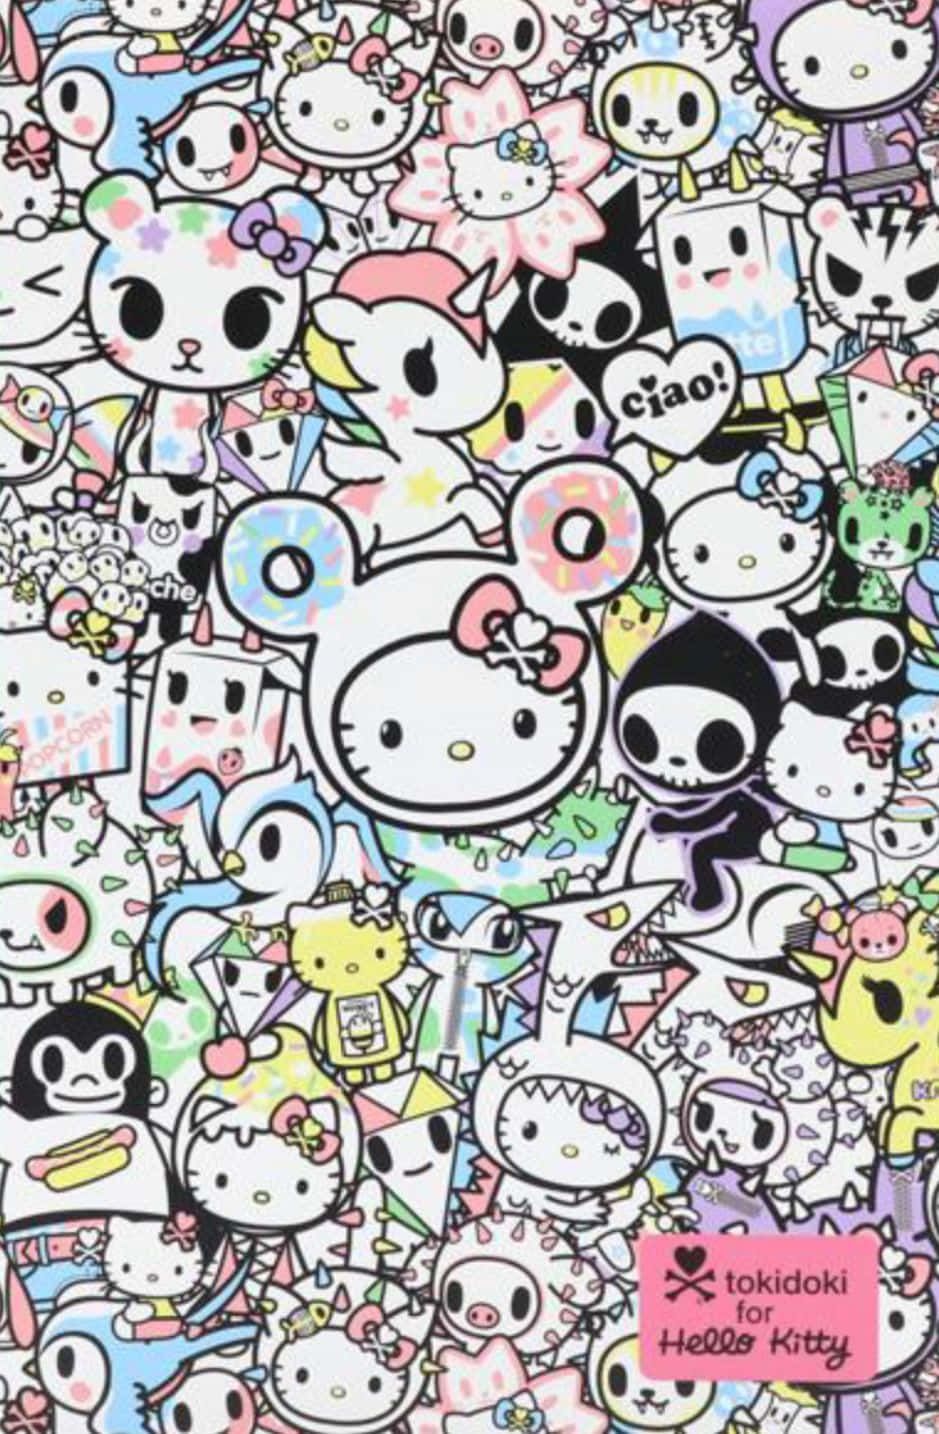 Download Hello Kitty Wallpaper With Gold And Pink Stripes